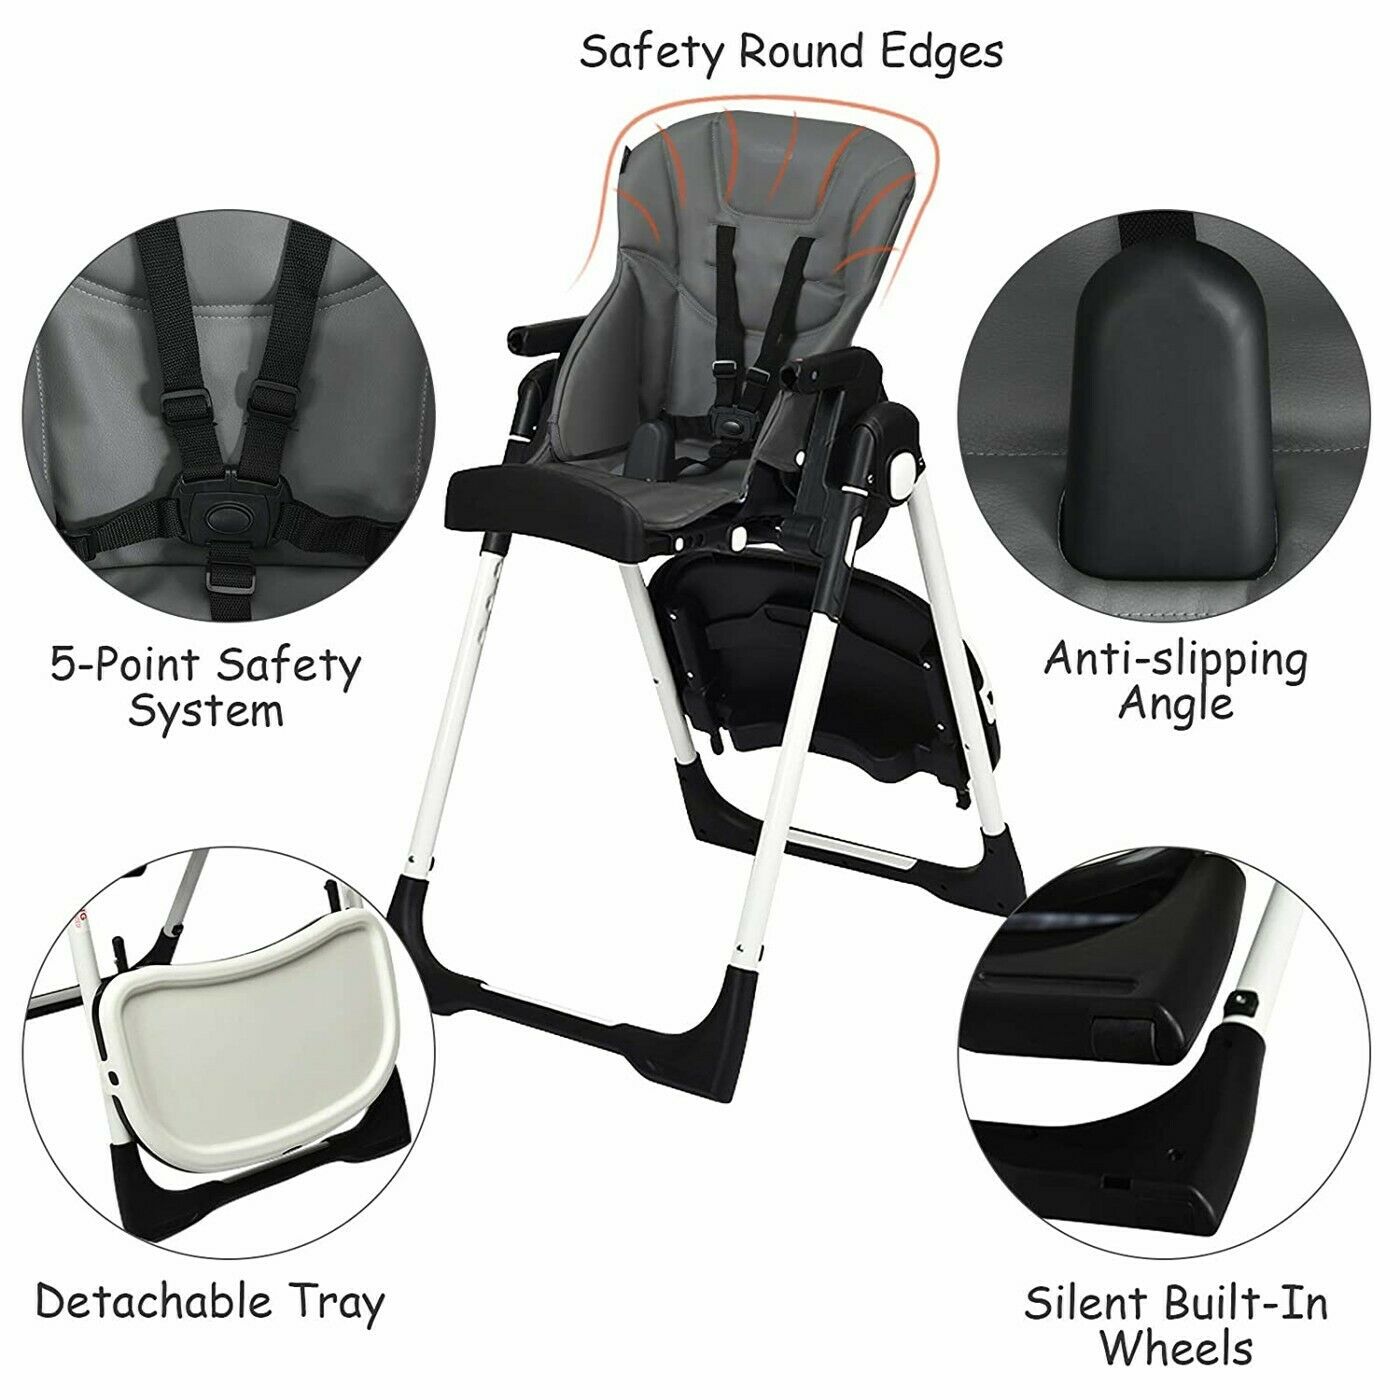 Baby Stroller Travel System with Car Seat Playard High Chair Graco Combo